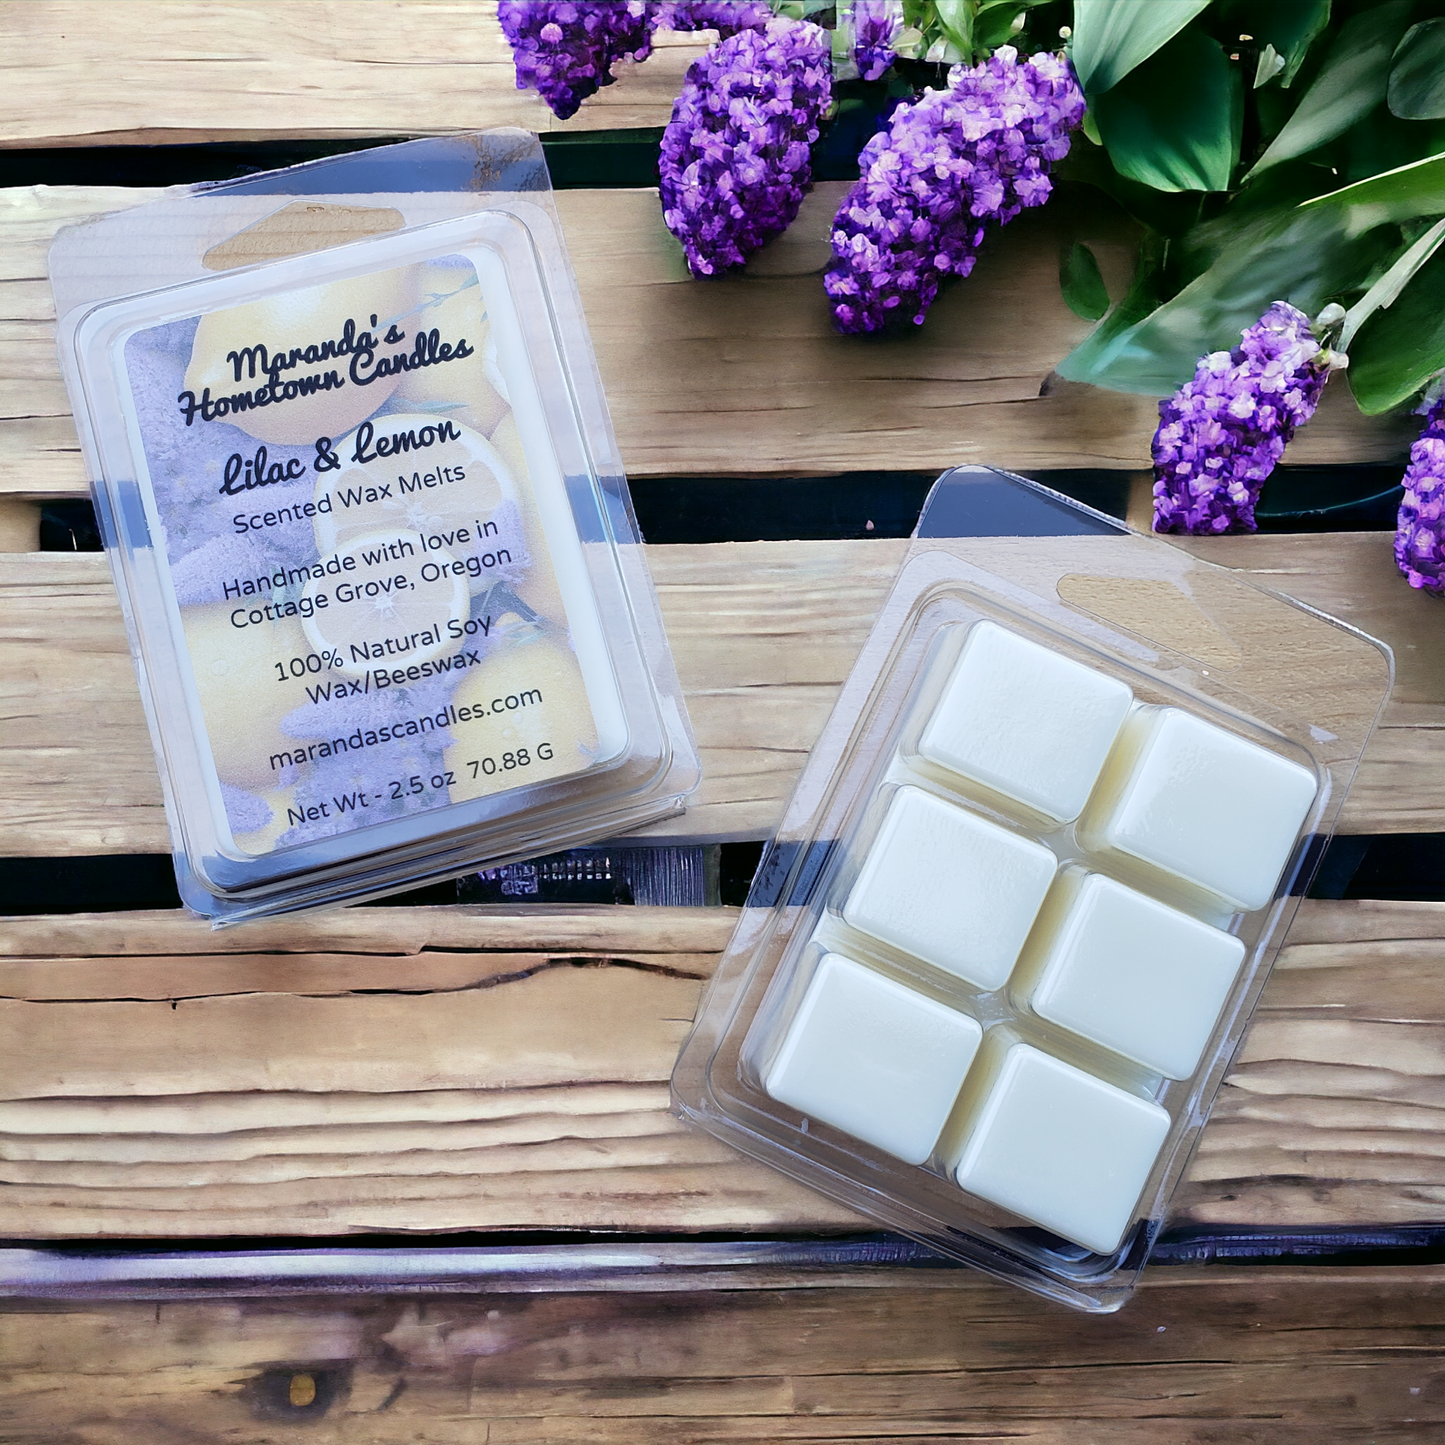 Lilac & Lemon Scented Soy Wax Candles/Wax Melts